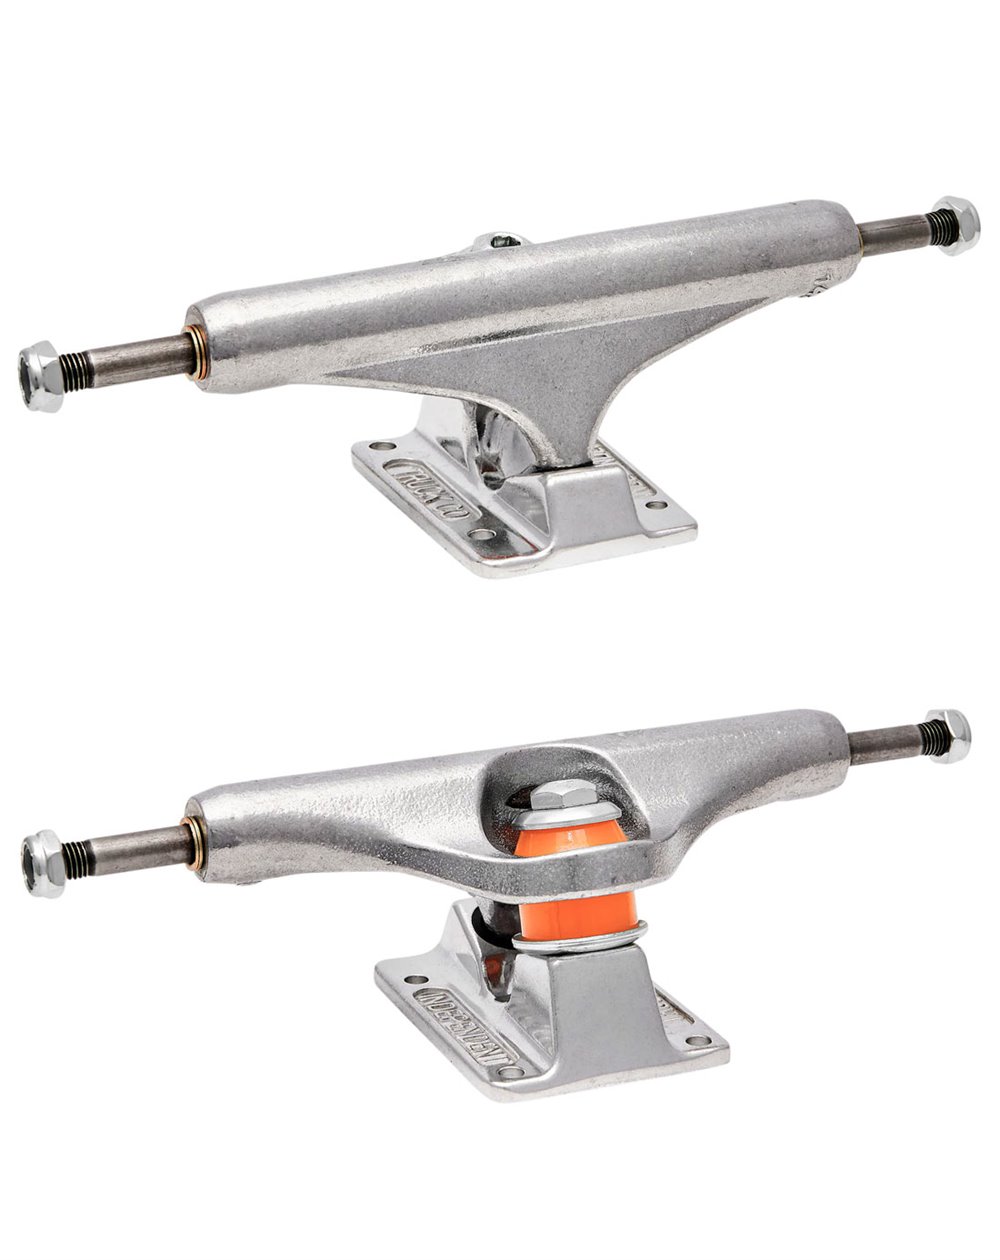 Independent MiD Forged Hollow 144mm Skateboard Trucks pack of 2